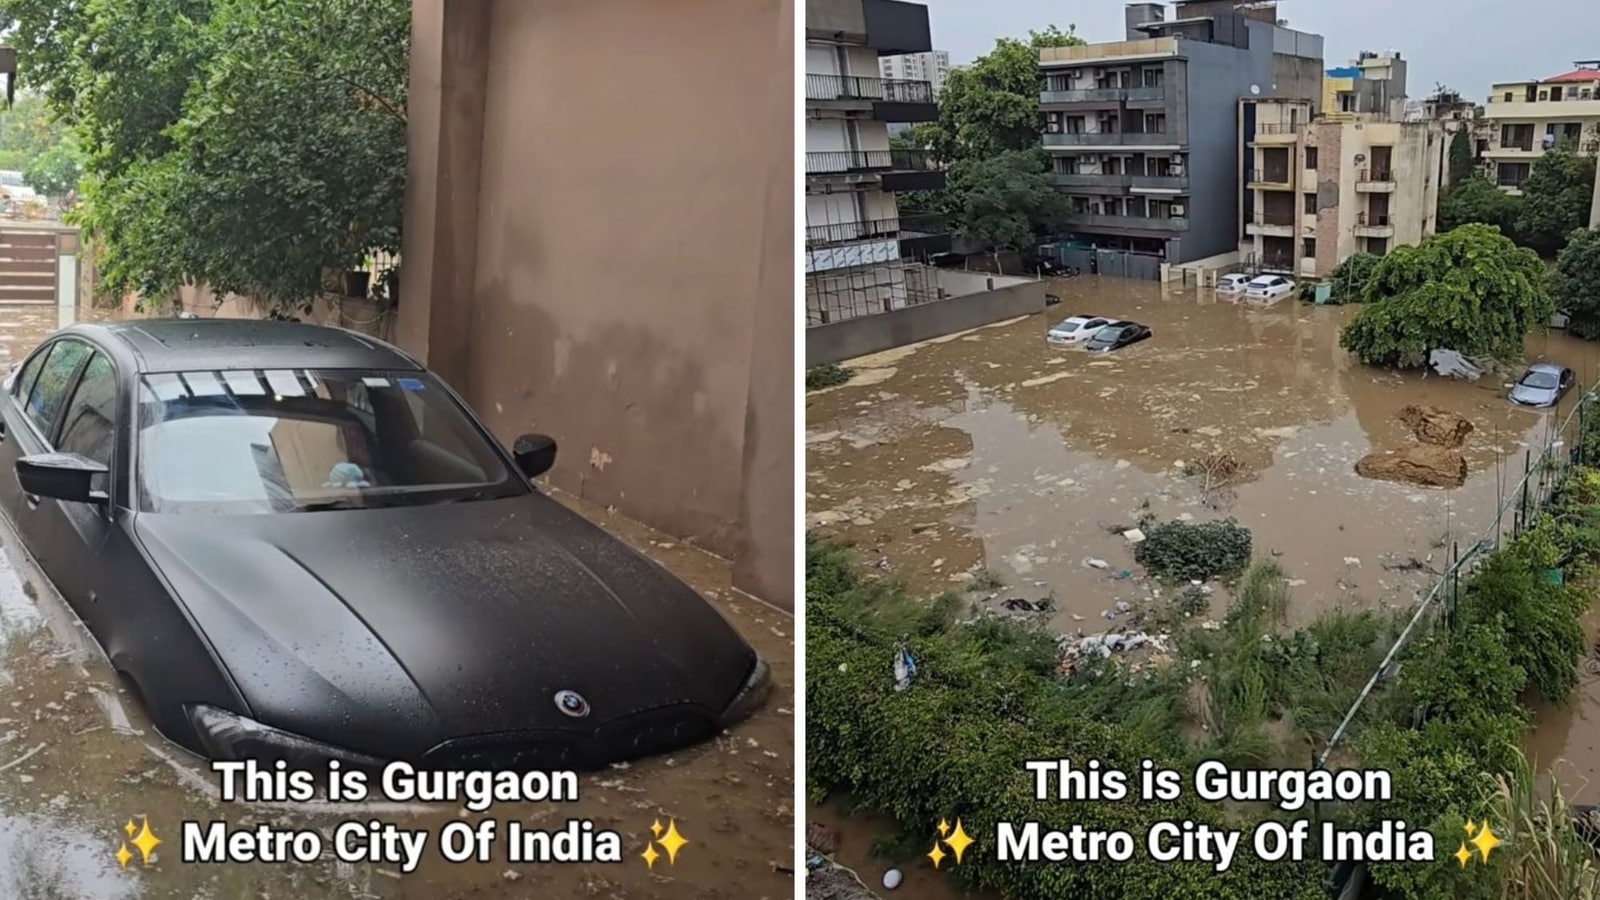 ‘My BMW, Mercedes, all gone’: Gurgaon man shares video of luxury cars submerged after rainfall | Trending